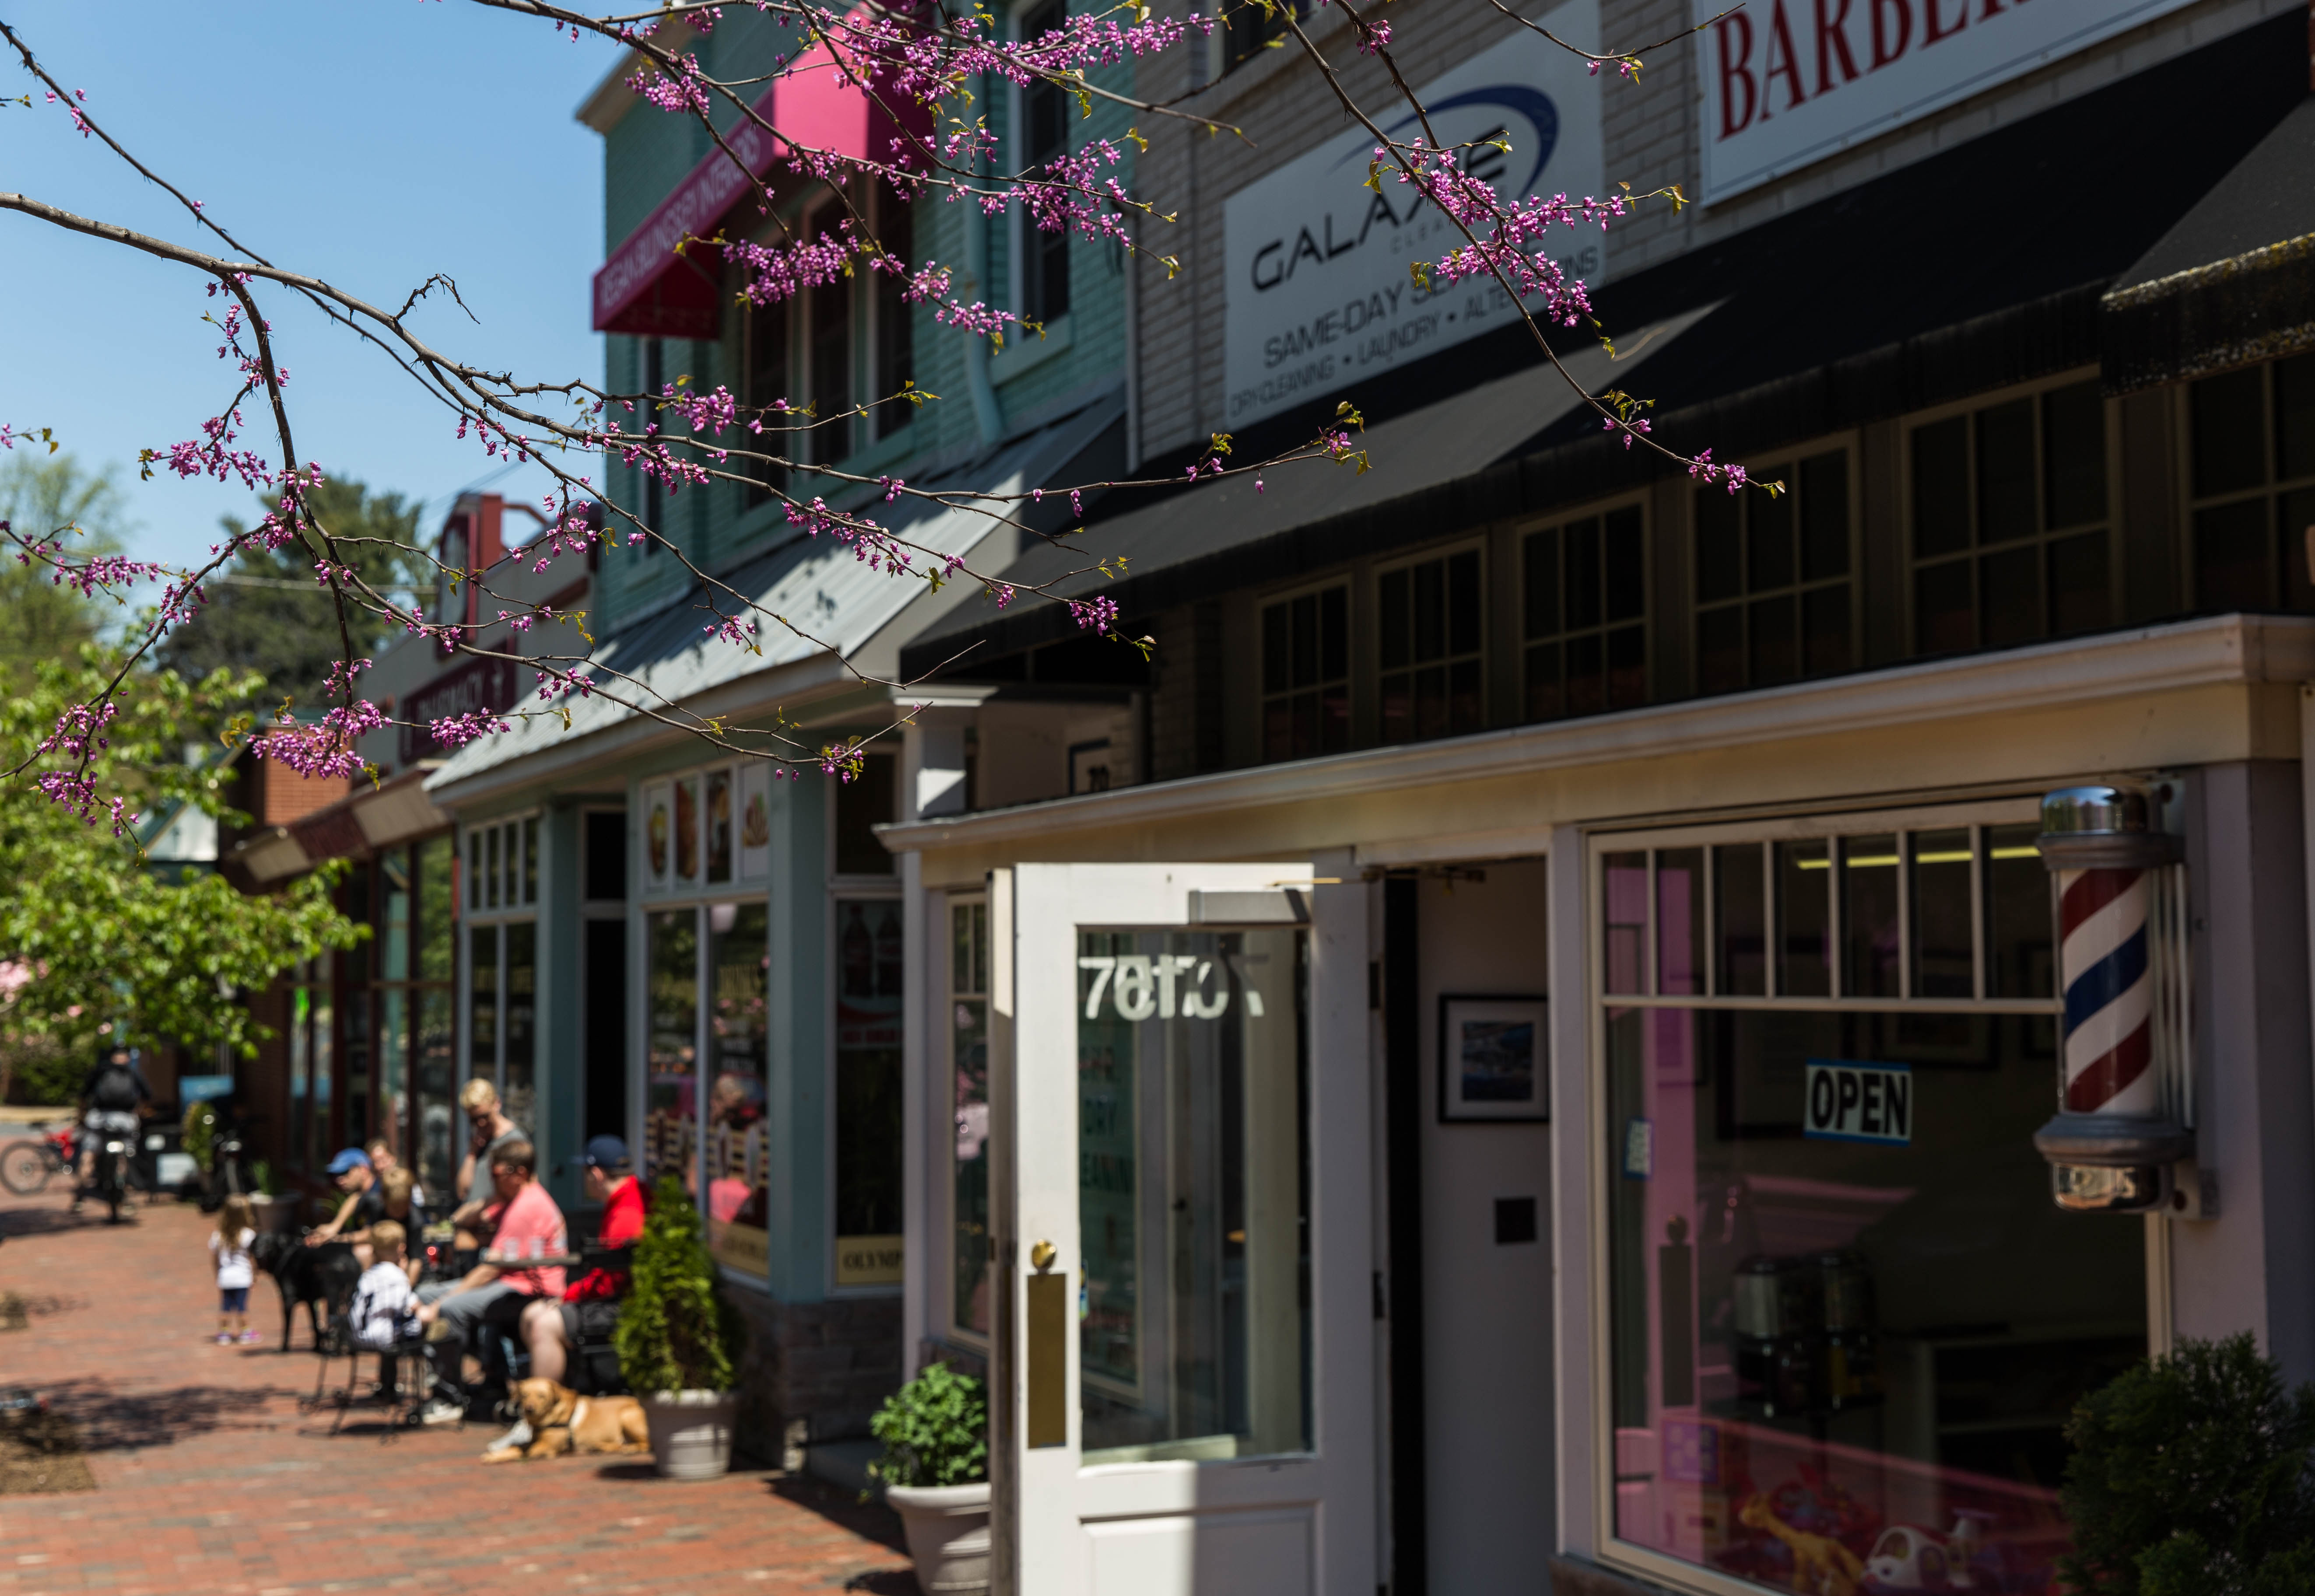 Chevy Chase Neighborhood Guide: What to Do, Where to Go, & More